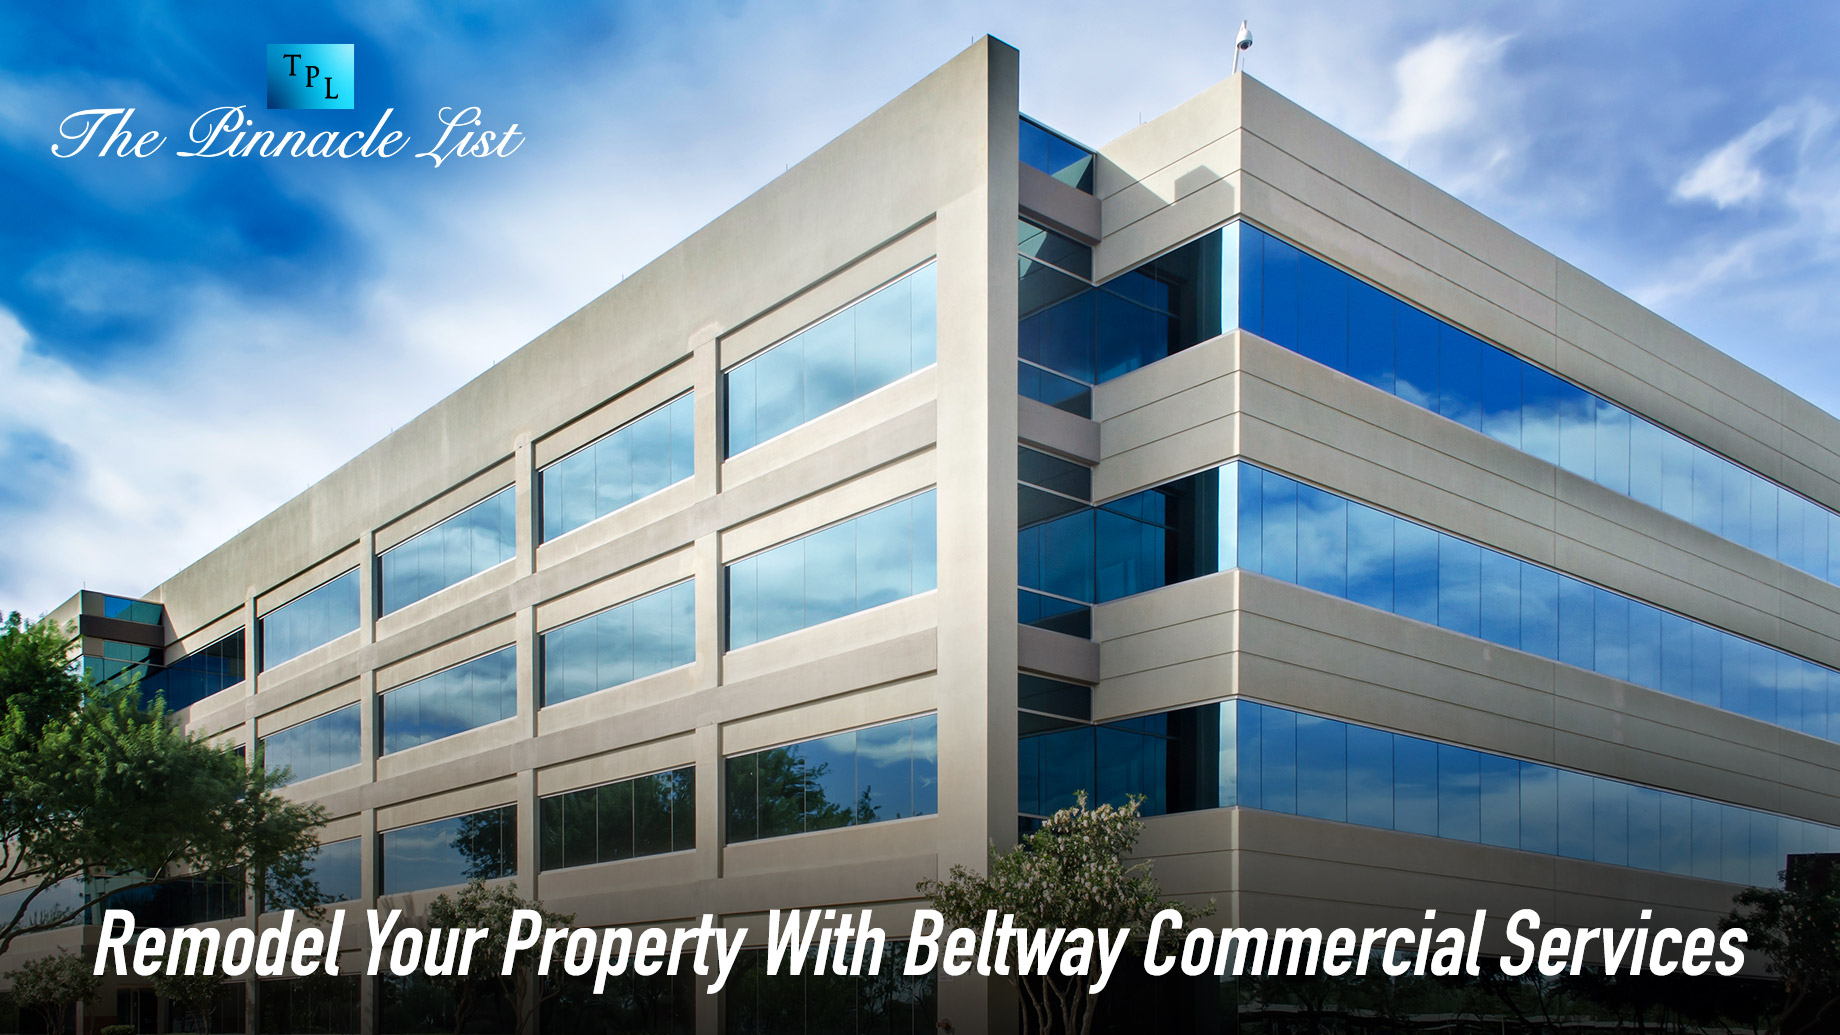 Remodel Your Property With Beltway Commercial Services